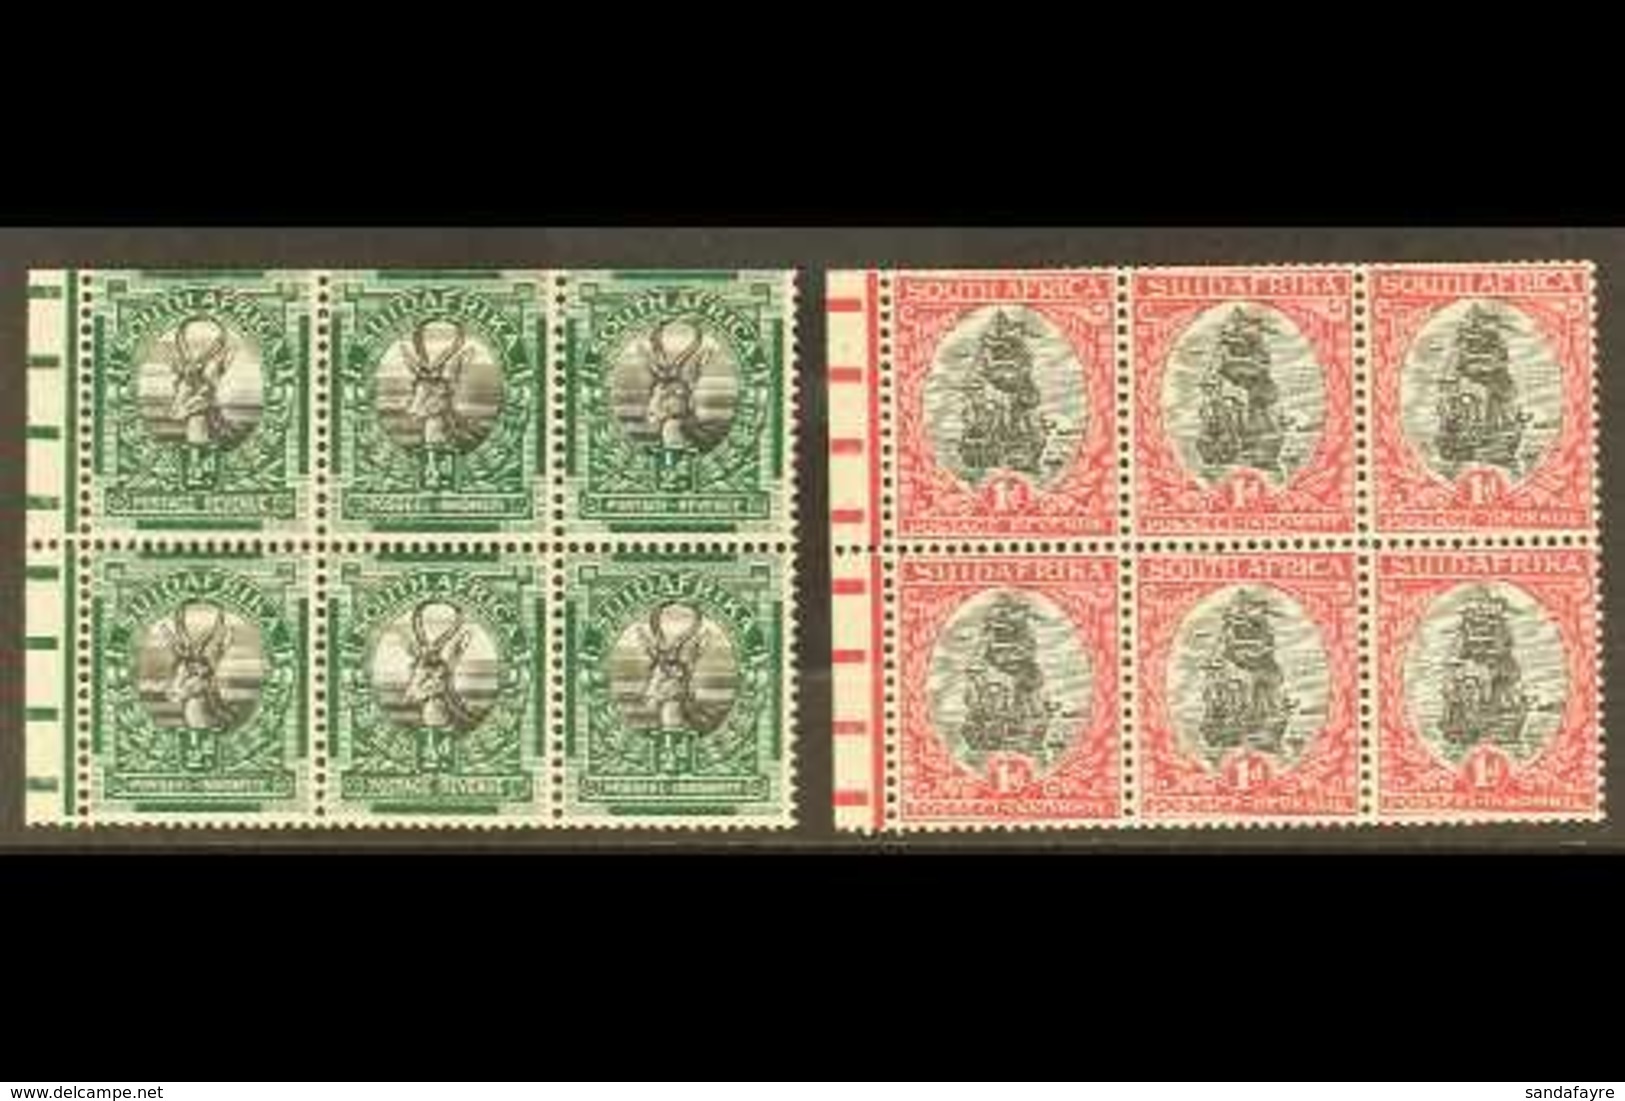 BOOKLET PANES  1926 ½d & 1d Booklet Panes Of 6, Both Watermark Inverted, London Printings, SG 30cw, 31dw, Ex SG SB5, Ver - Unclassified